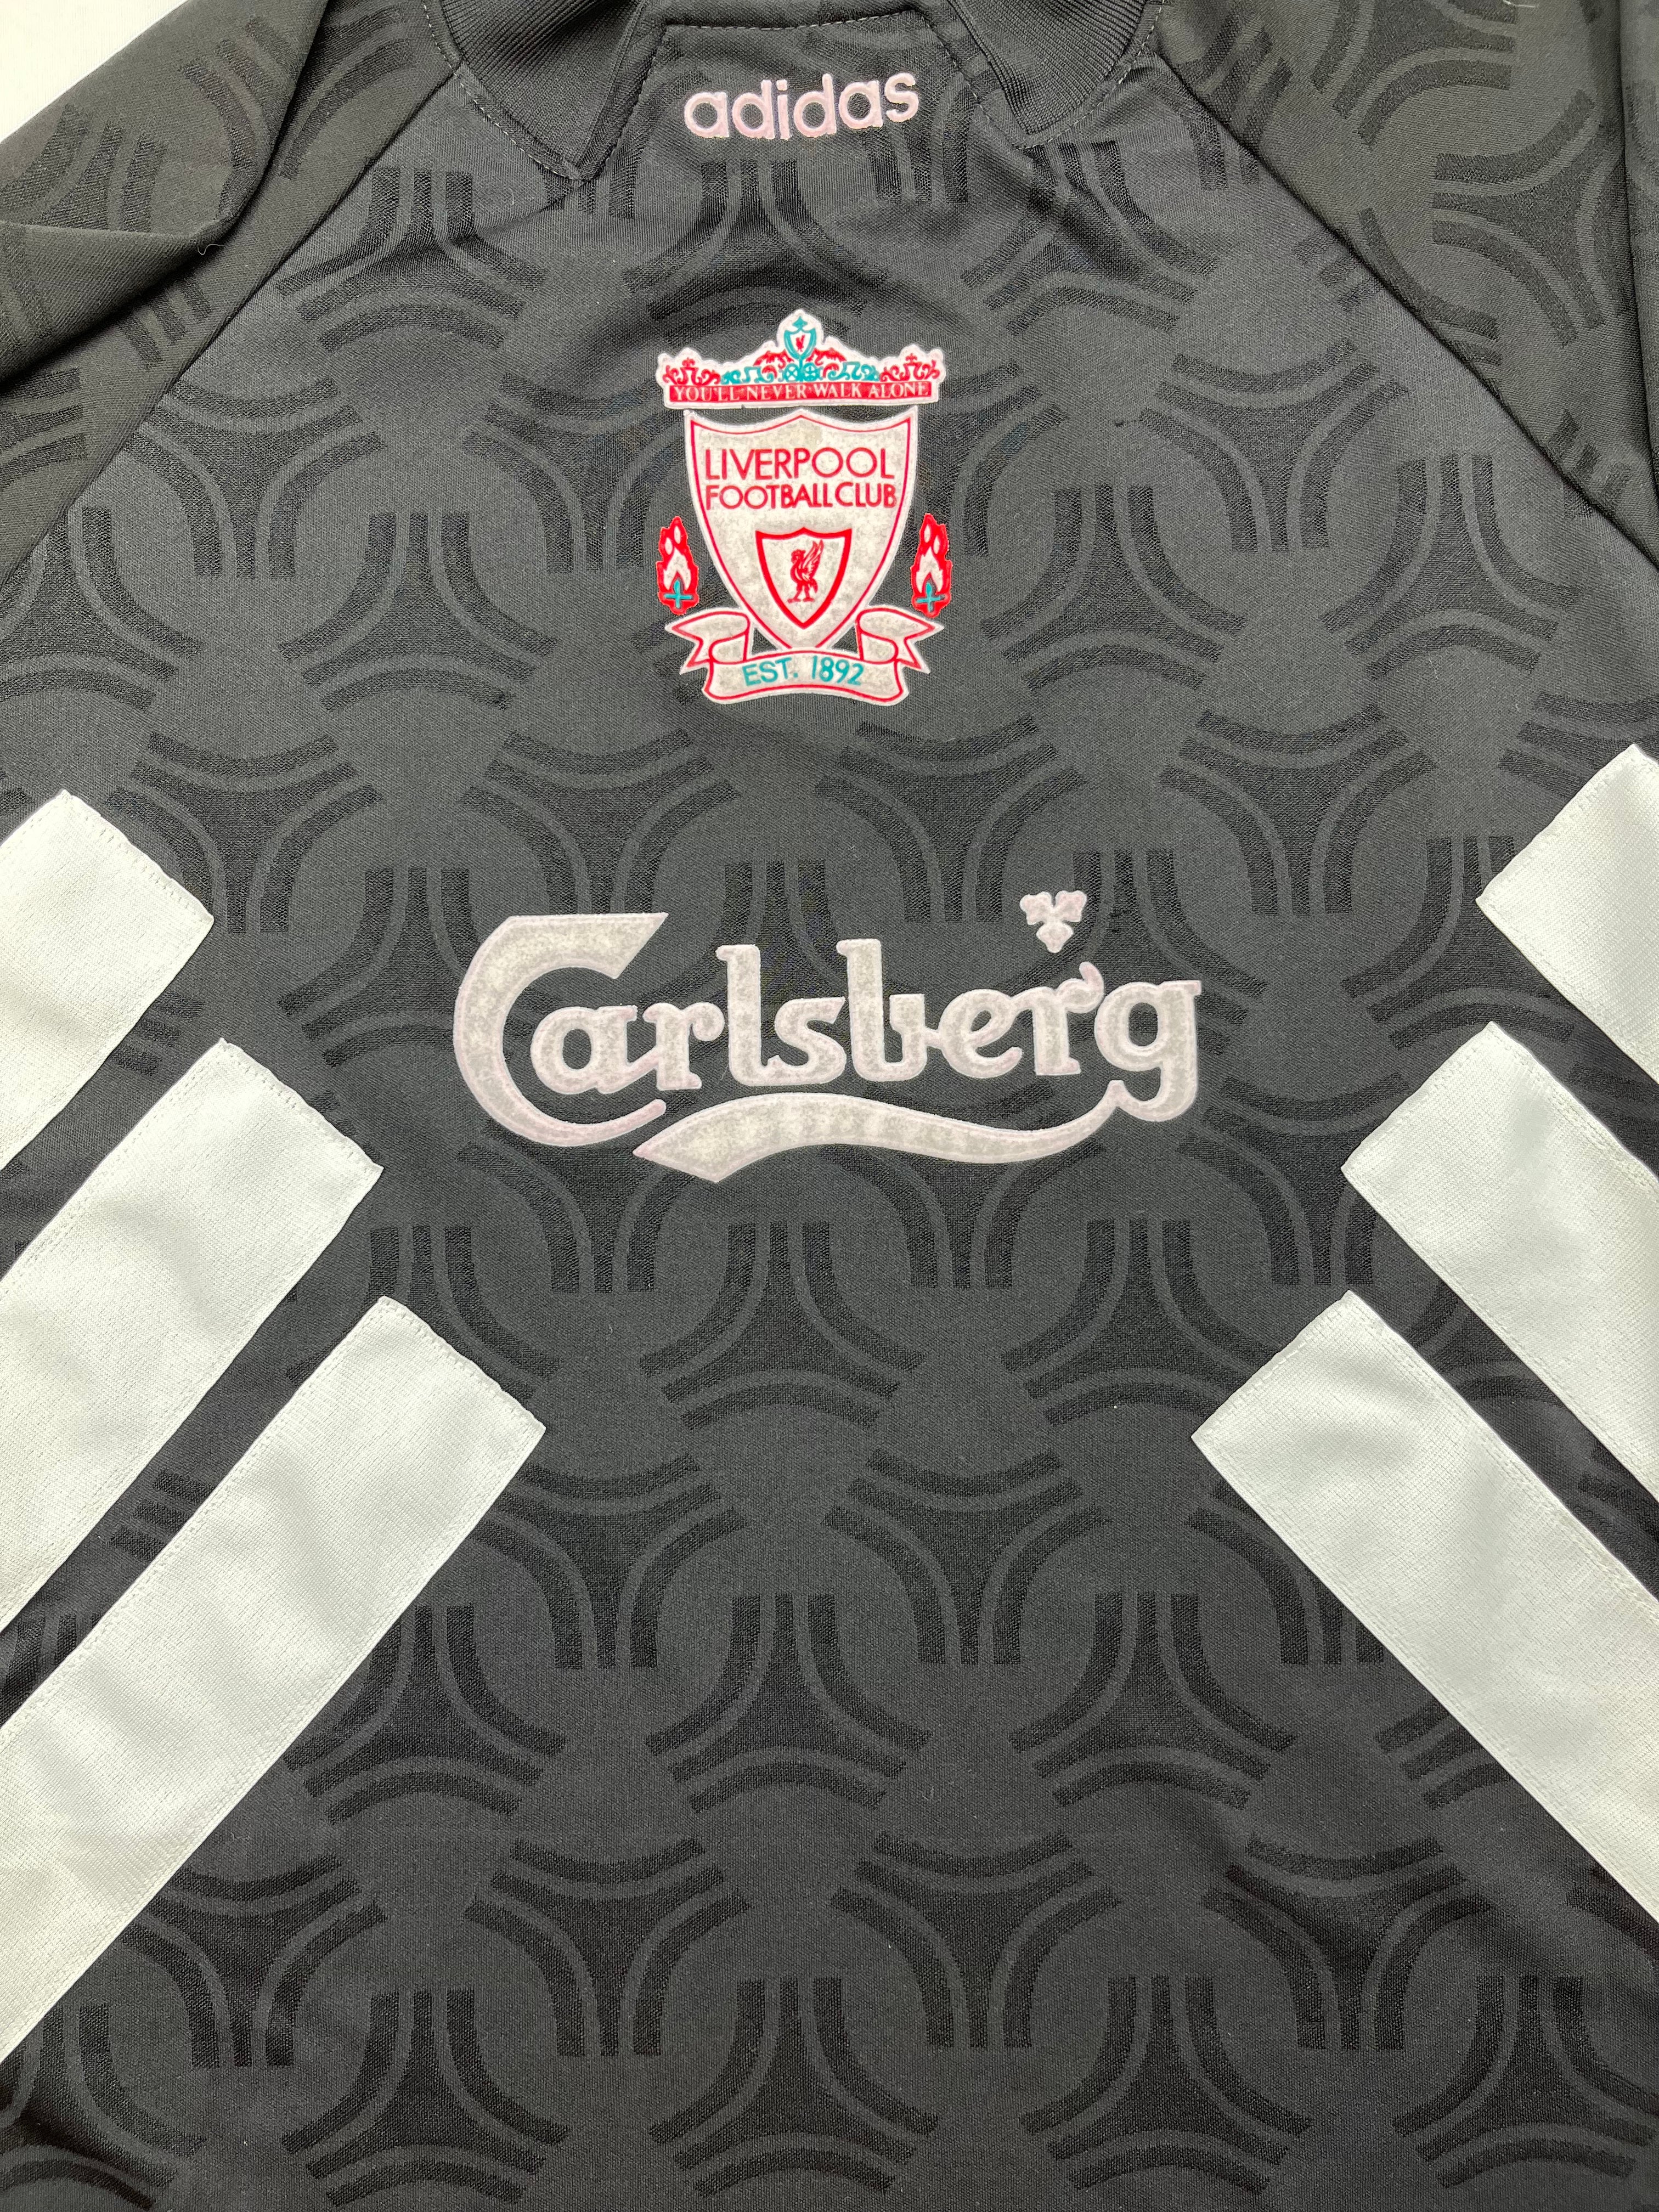 Maillot Liverpool GK 1993/94 (S) 8.5/10